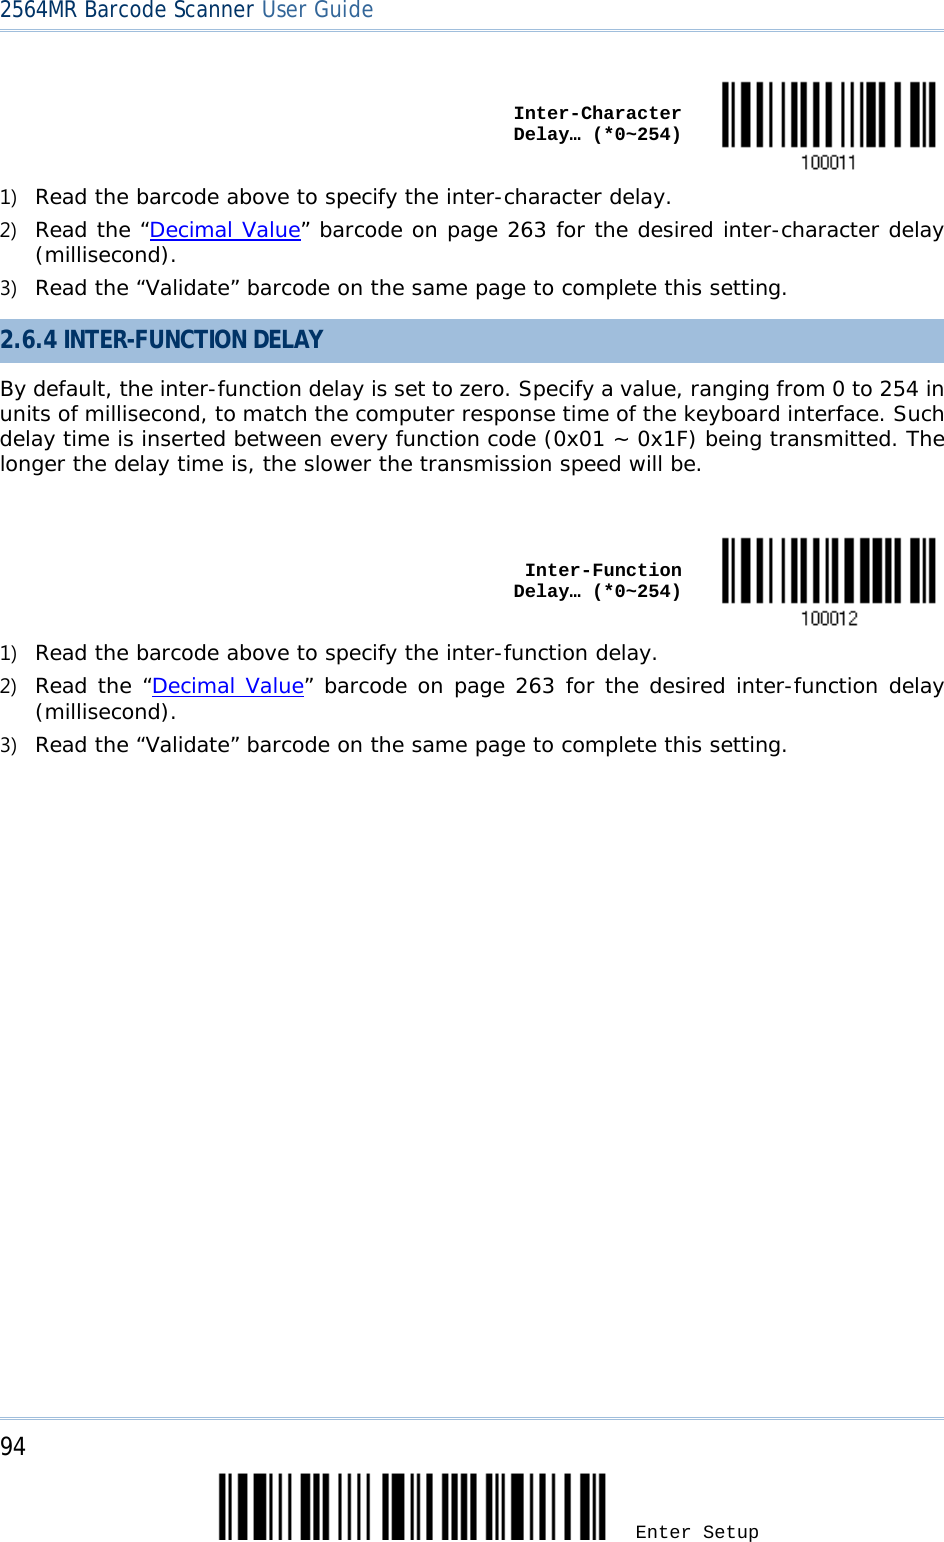 2564MR Barcode Scanner User Guide     Inter-Character Delay… (*0~254)  1) Read the barcode above to specify the inter-character delay. 2) Read the “Decimal Value” barcode on page 263 for the desired inter-character delay (millisecond).  3) Read the “Validate” barcode on the same page to complete this setting. 2.6.4 INTER-FUNCTION DELAY By default, the inter-function delay is set to zero. Specify a value, ranging from 0 to 254 in units of millisecond, to match the computer response time of the keyboard interface. Such delay time is inserted between every function code (0x01 ~ 0x1F) being transmitted. The longer the delay time is, the slower the transmission speed will be.     Inter-Function Delay… (*0~254)  1) Read the barcode above to specify the inter-function delay. 2) Read the “Decimal Value” barcode on page 263 for the desired inter-function delay (millisecond).  3) Read the “Validate” barcode on the same page to complete this setting. 94 Enter Setup 